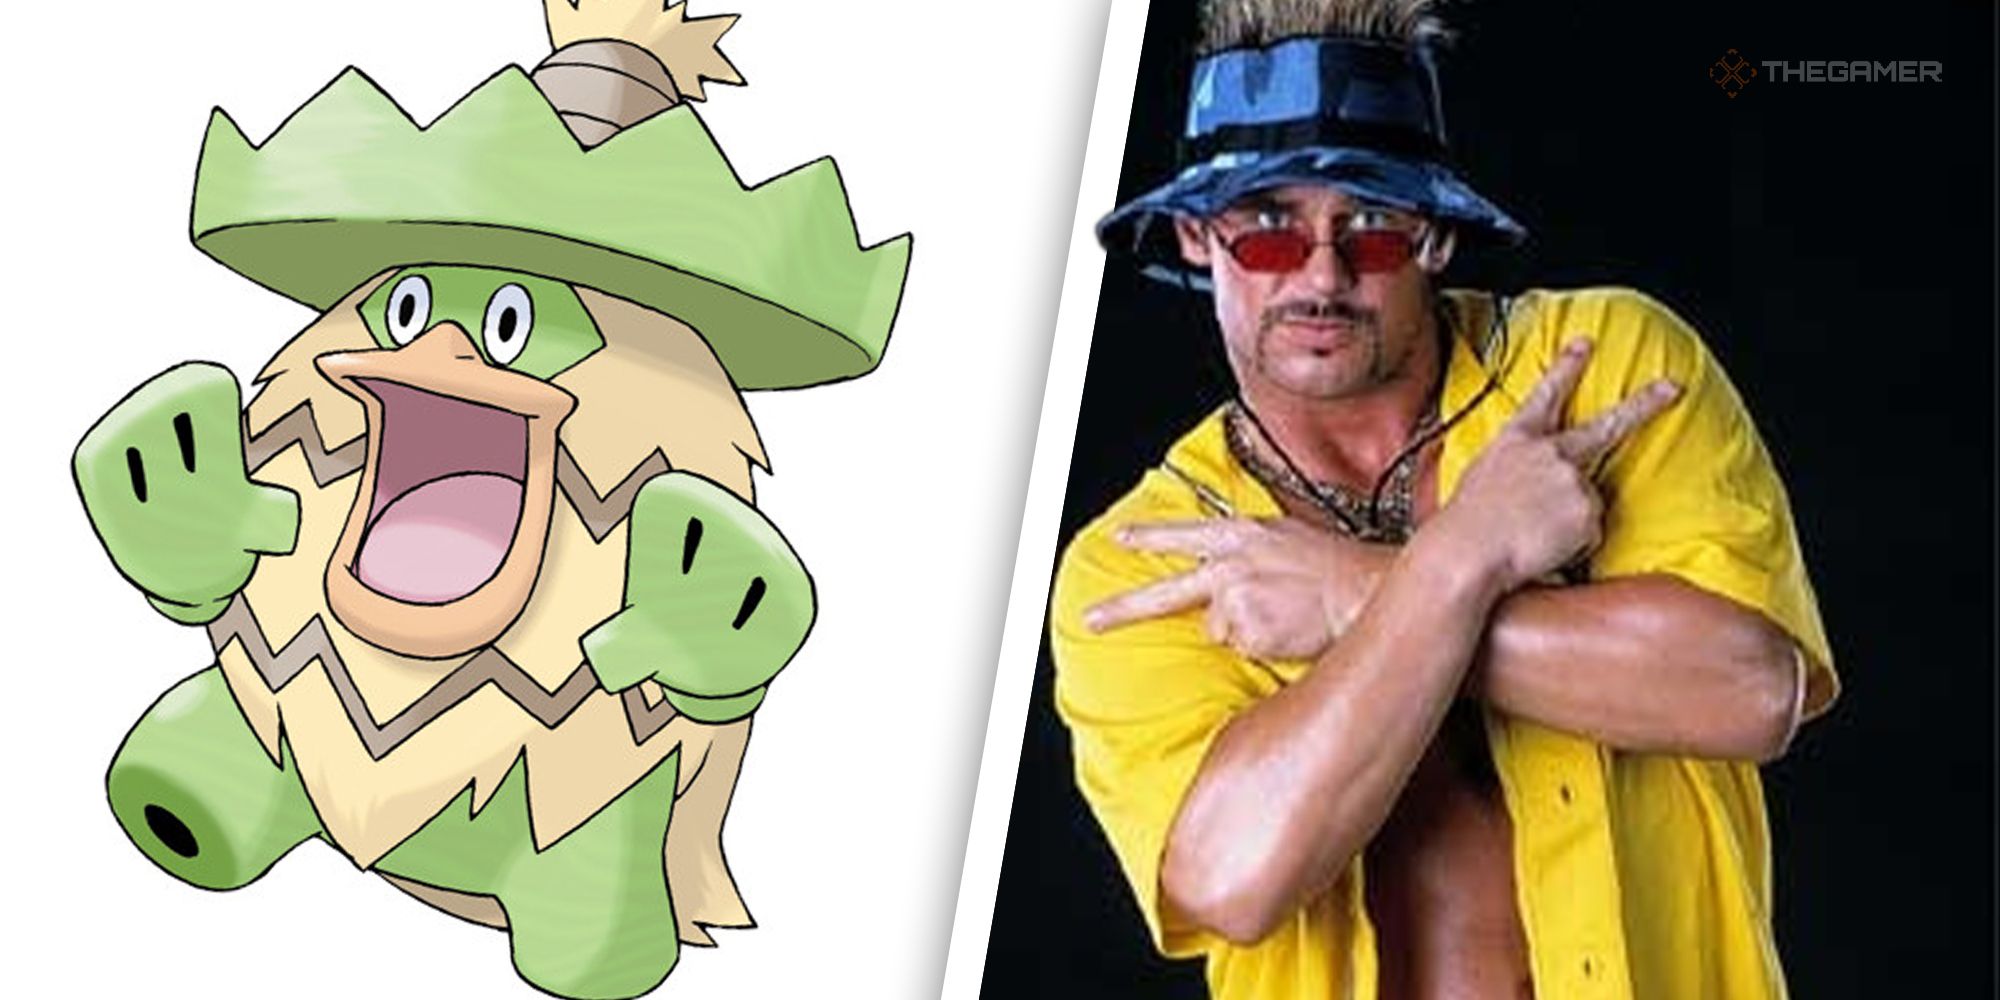 Heres 30 Wrestlers As Pokemon For The Royal Rumble (24)